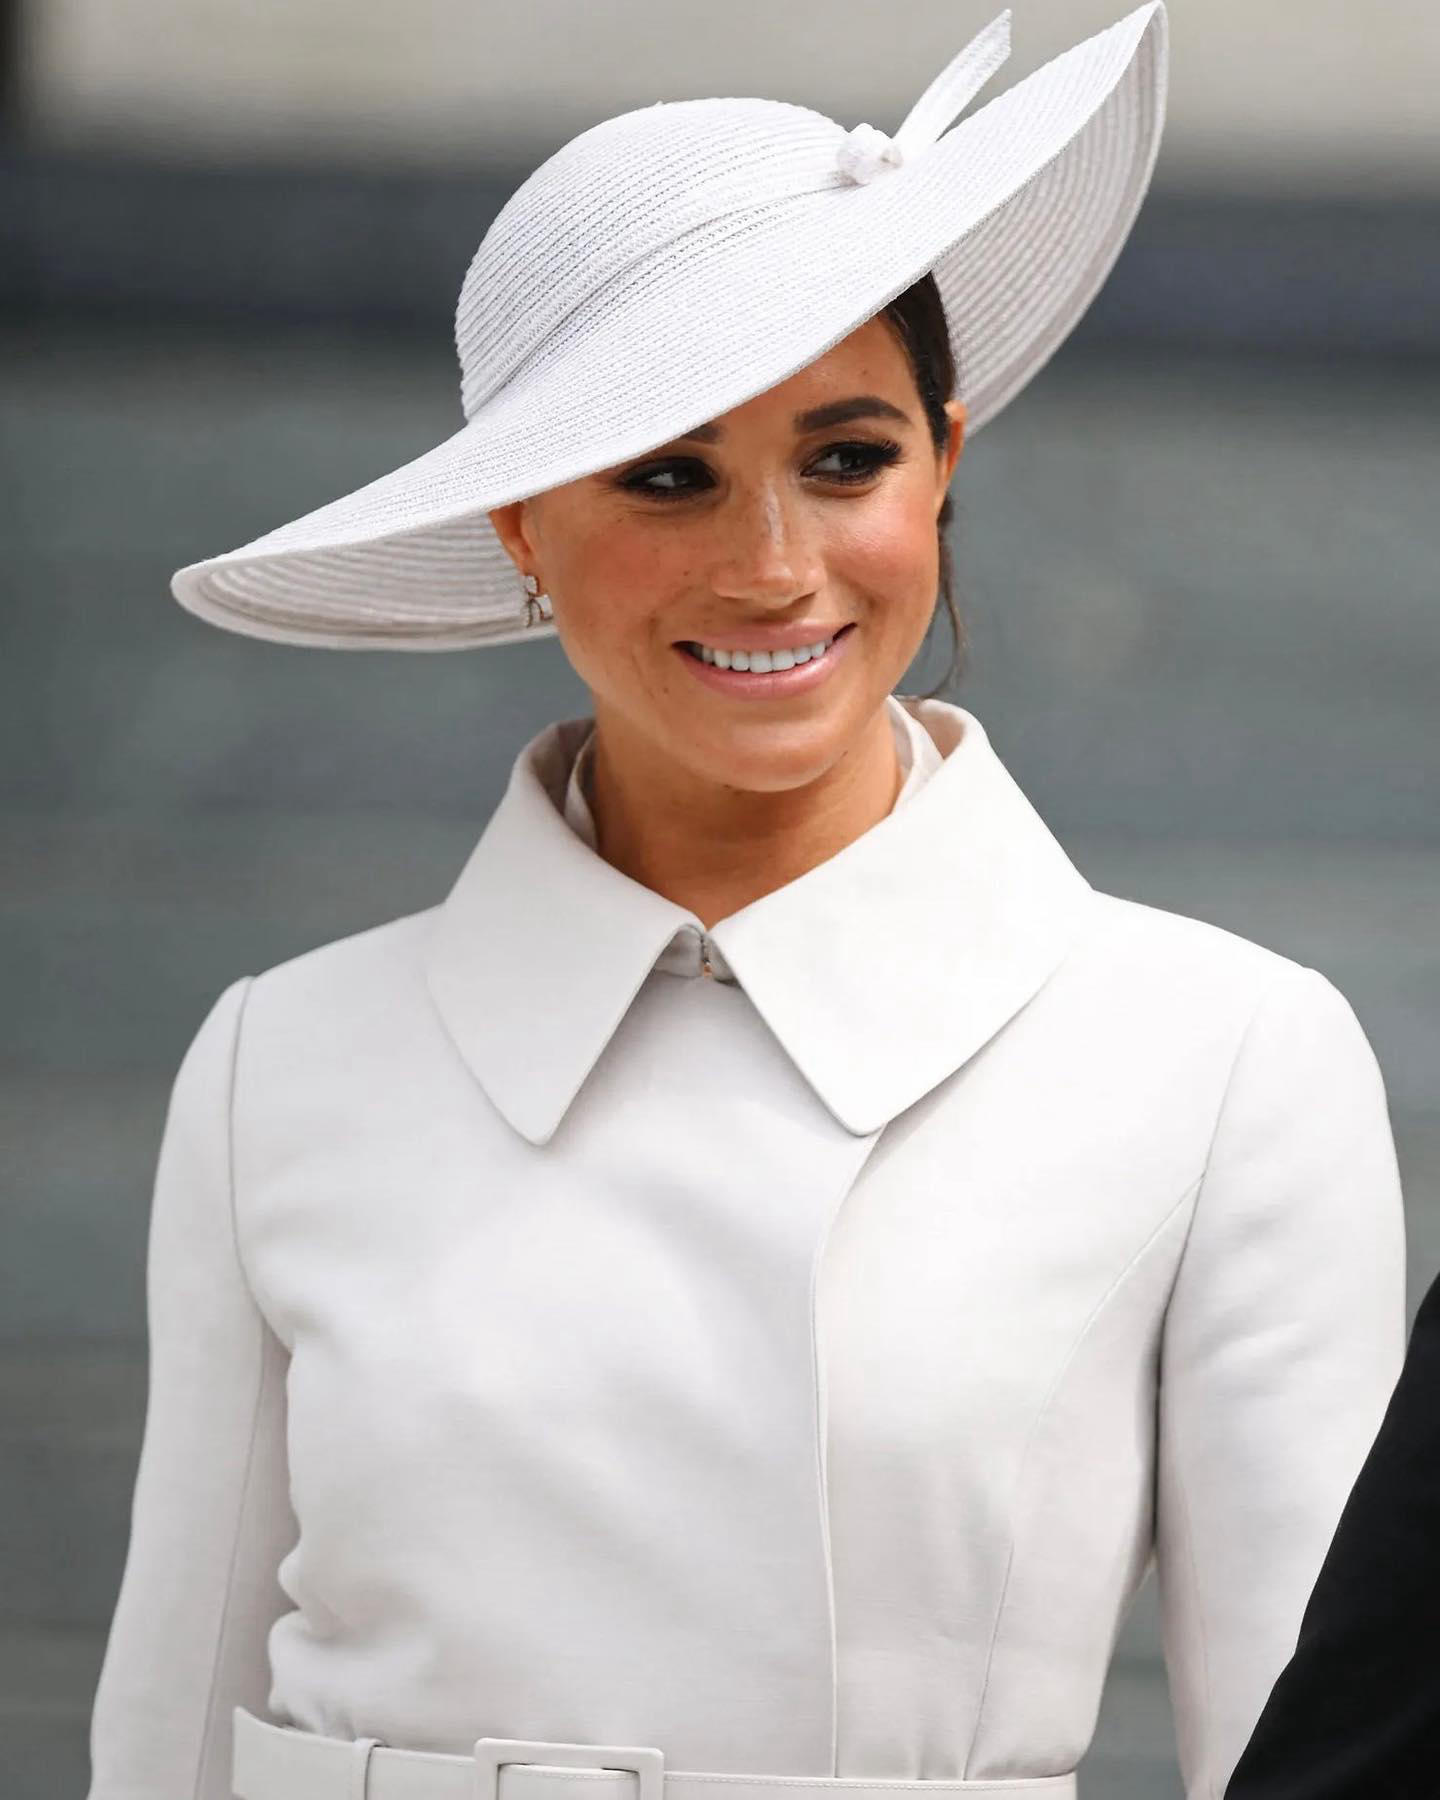 Vanities - The royal women brought some seriously chic hat game to Friday morning’s Service of Thank